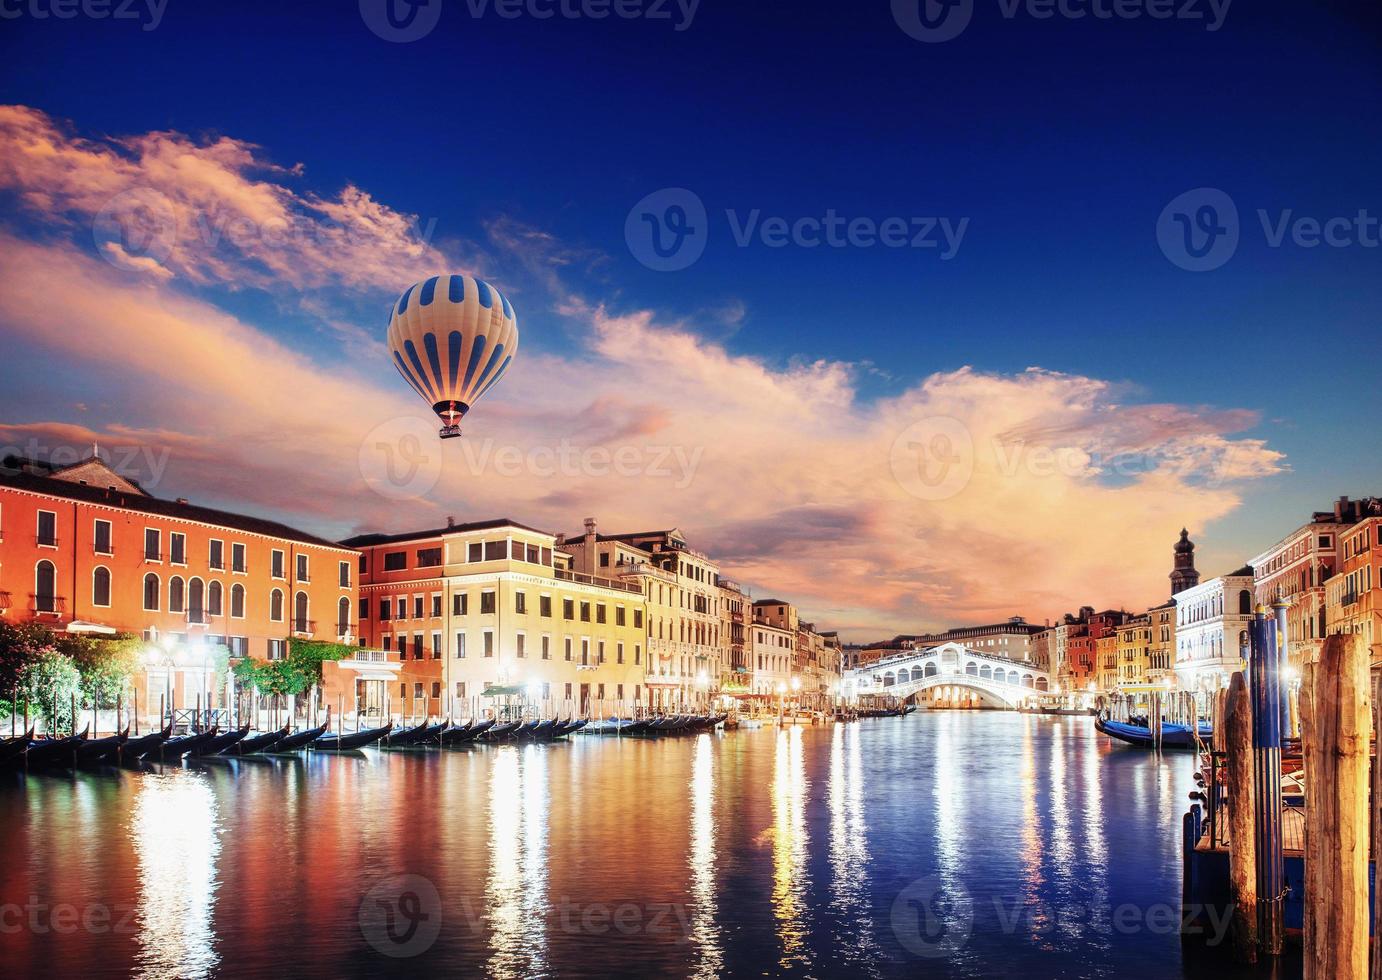 City landscape. Rialto Bridge Ponte Di Rialto in Venice, Italy at night. Many tourists visiting the beauty of the city throughout the year photo